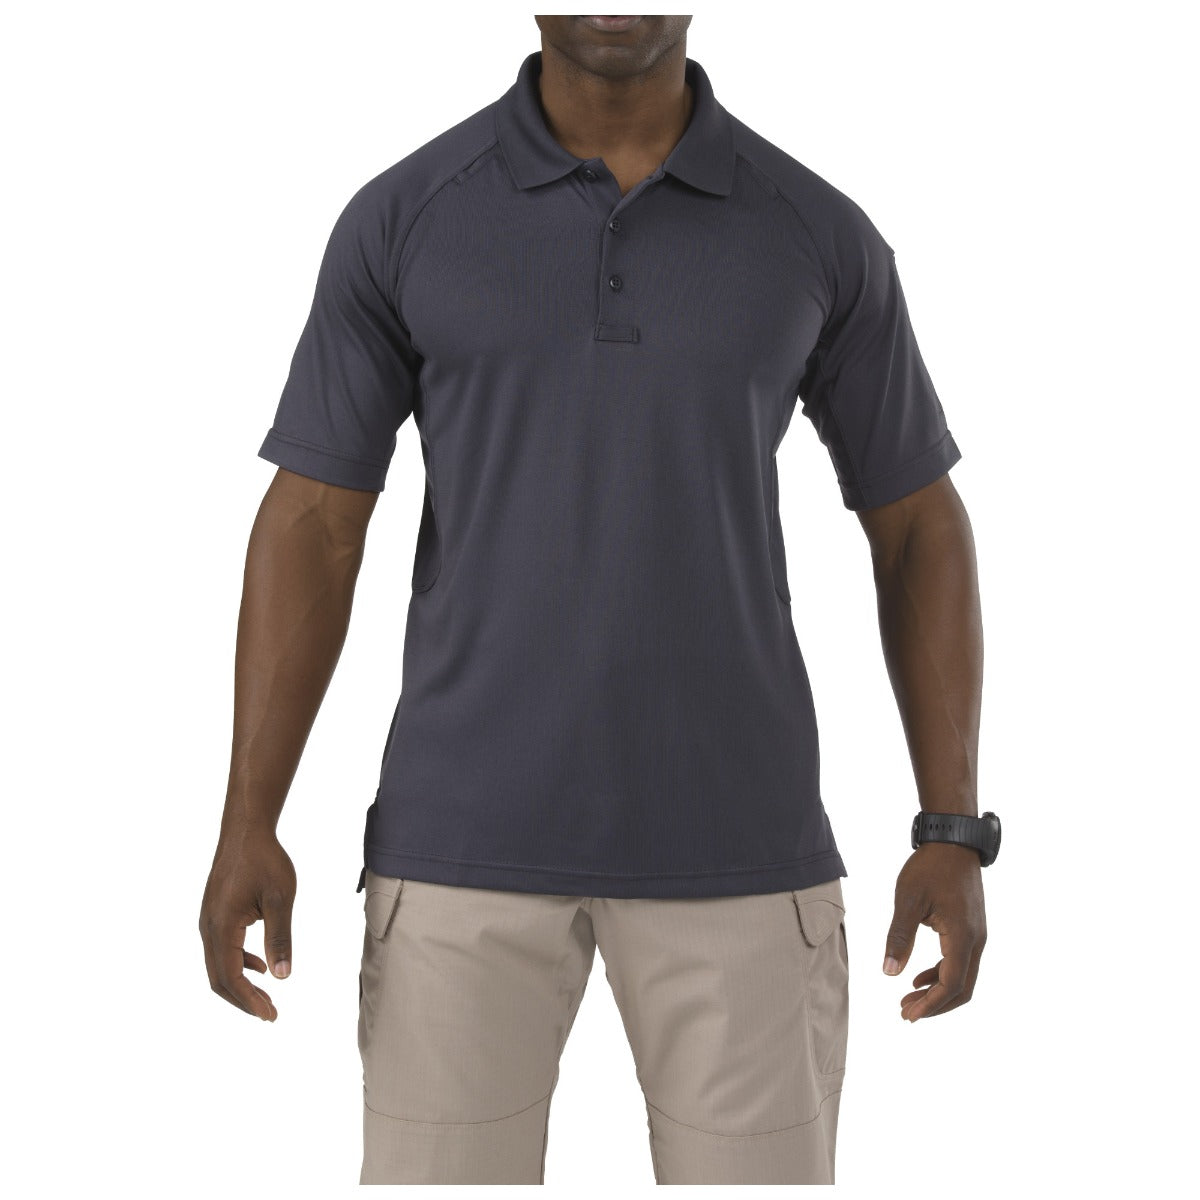 5.11 Tactical Performance Short Sleeve Polo (71049) | The Fire Center | Fuego Fire Center | Firefighter Gear | Made of jersey-knit 100% polyester fabric, the Performance Polo is wrinkle and shrink-resistant, snag-resistant, anti-odor, and has a stay-flat, no-roll collar